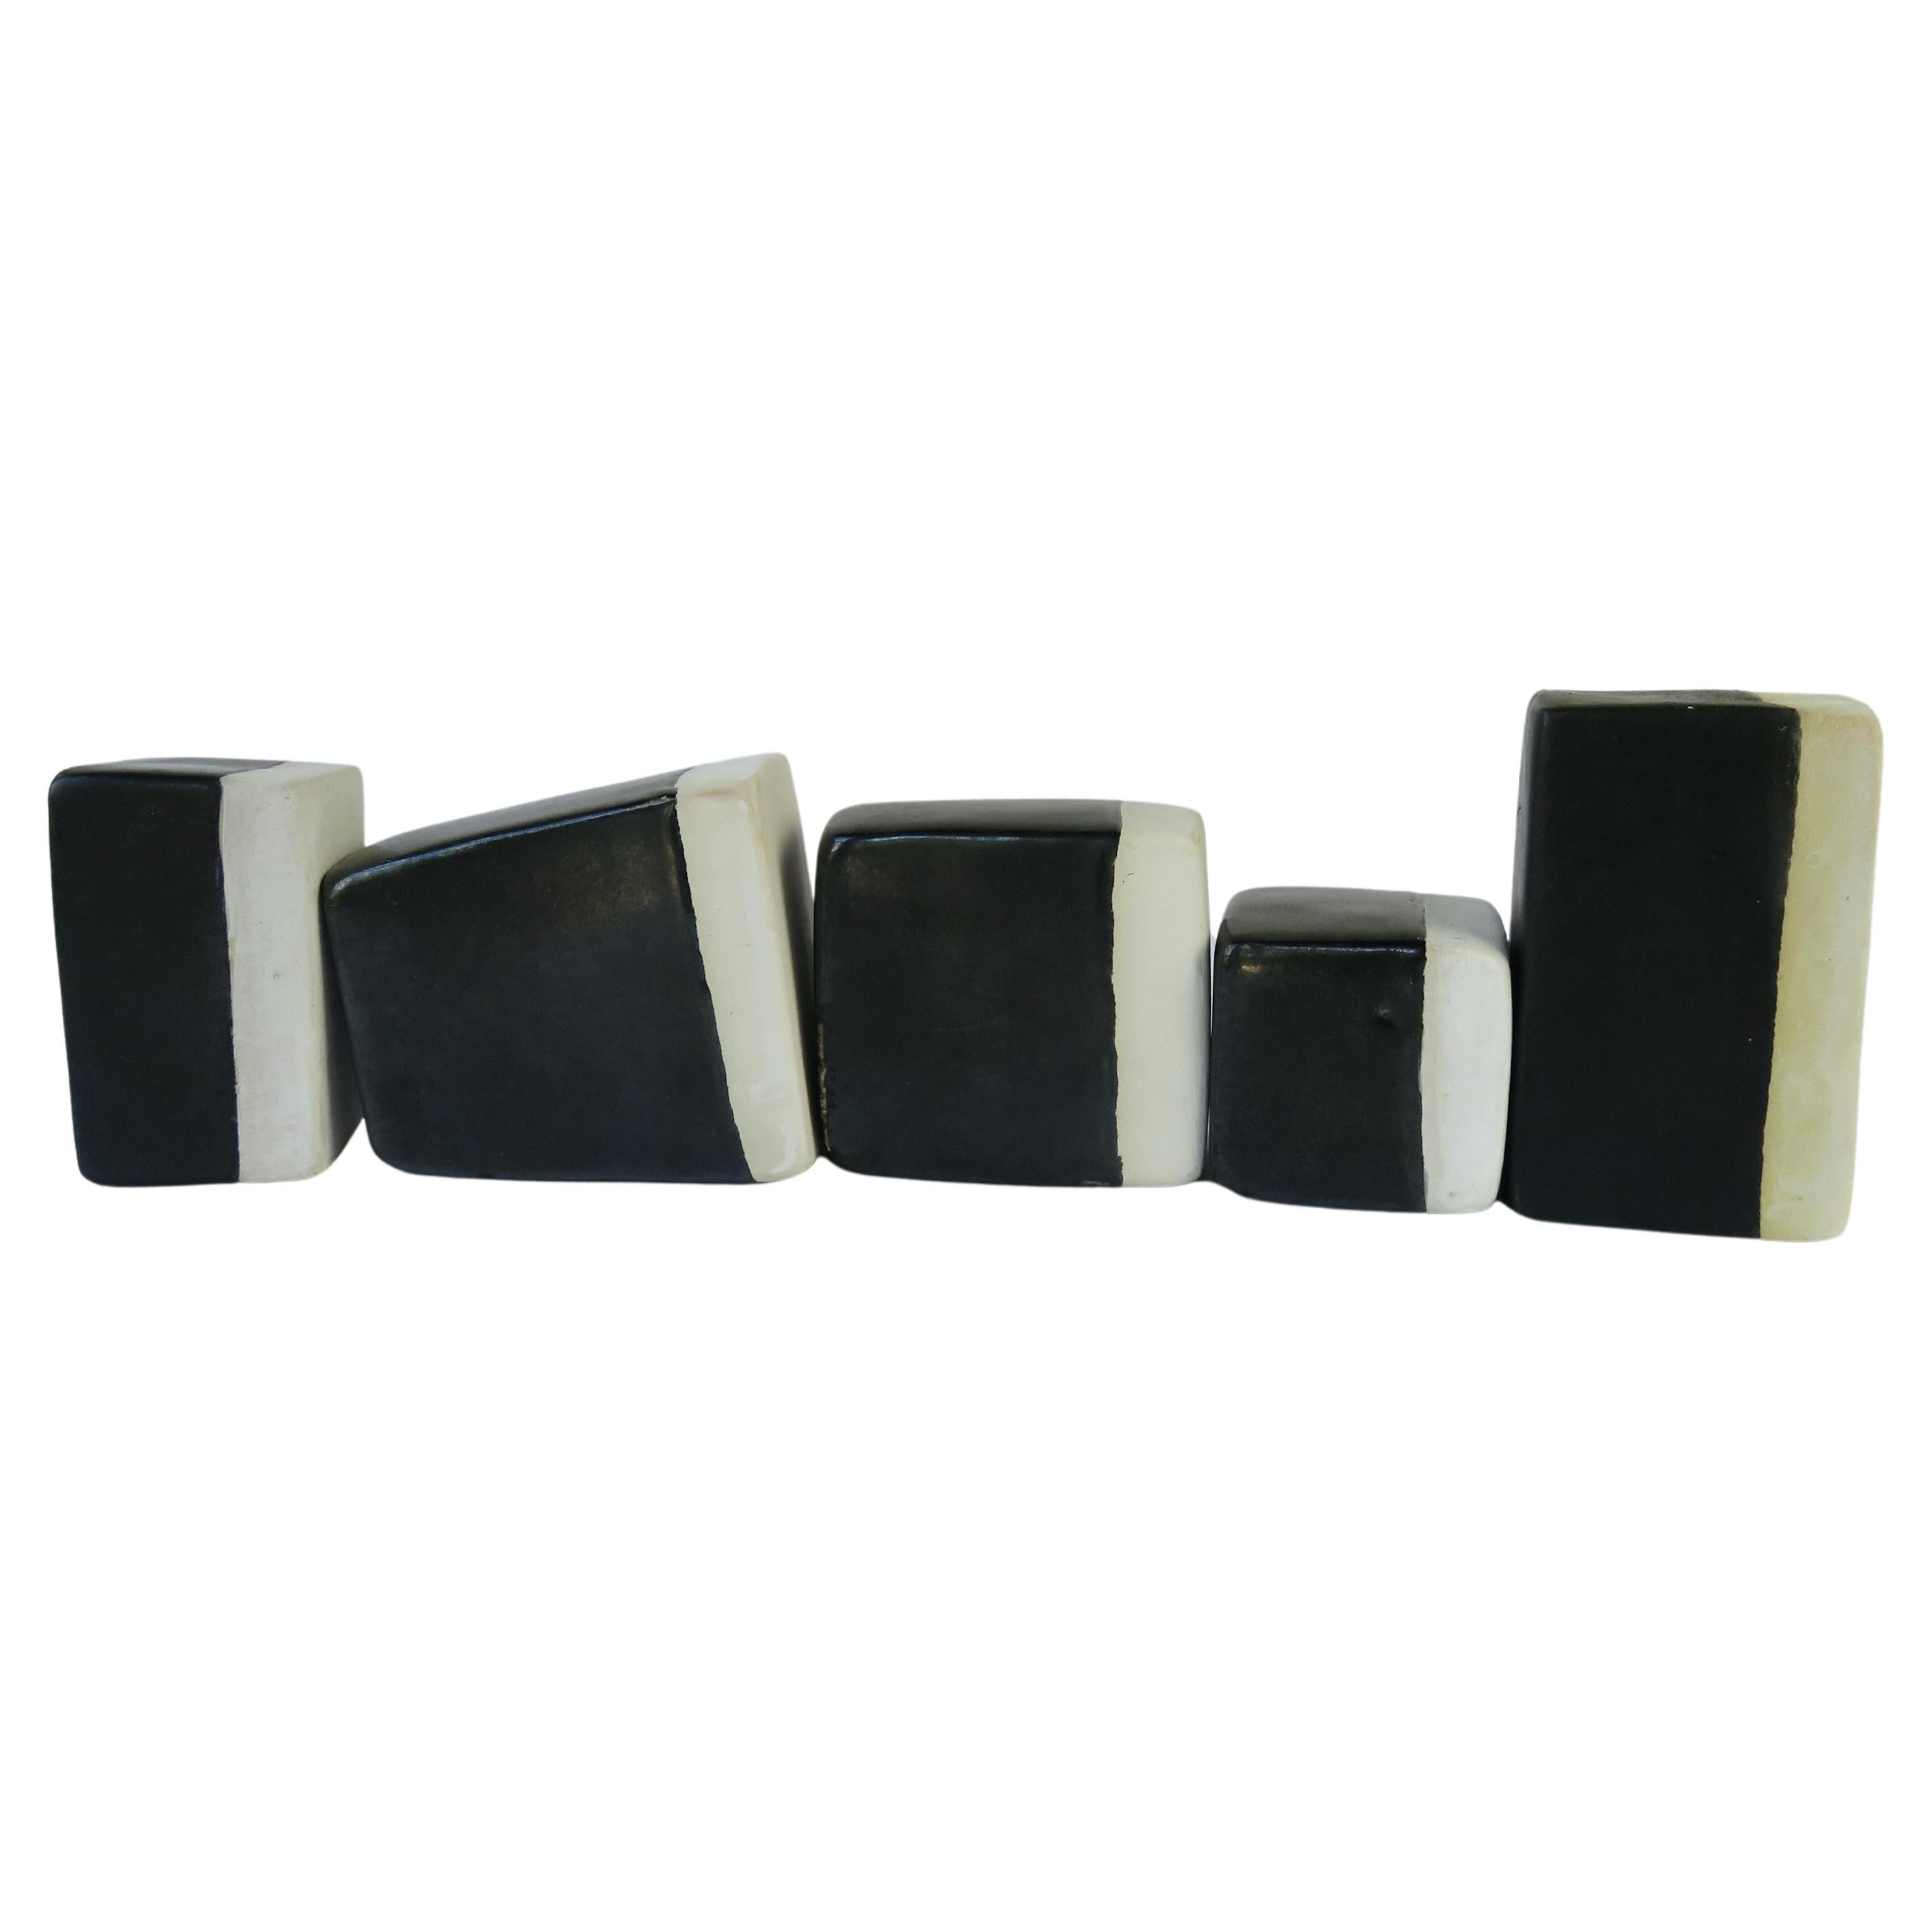 5 Glazed Black and White Stackable, Moveable Blocks